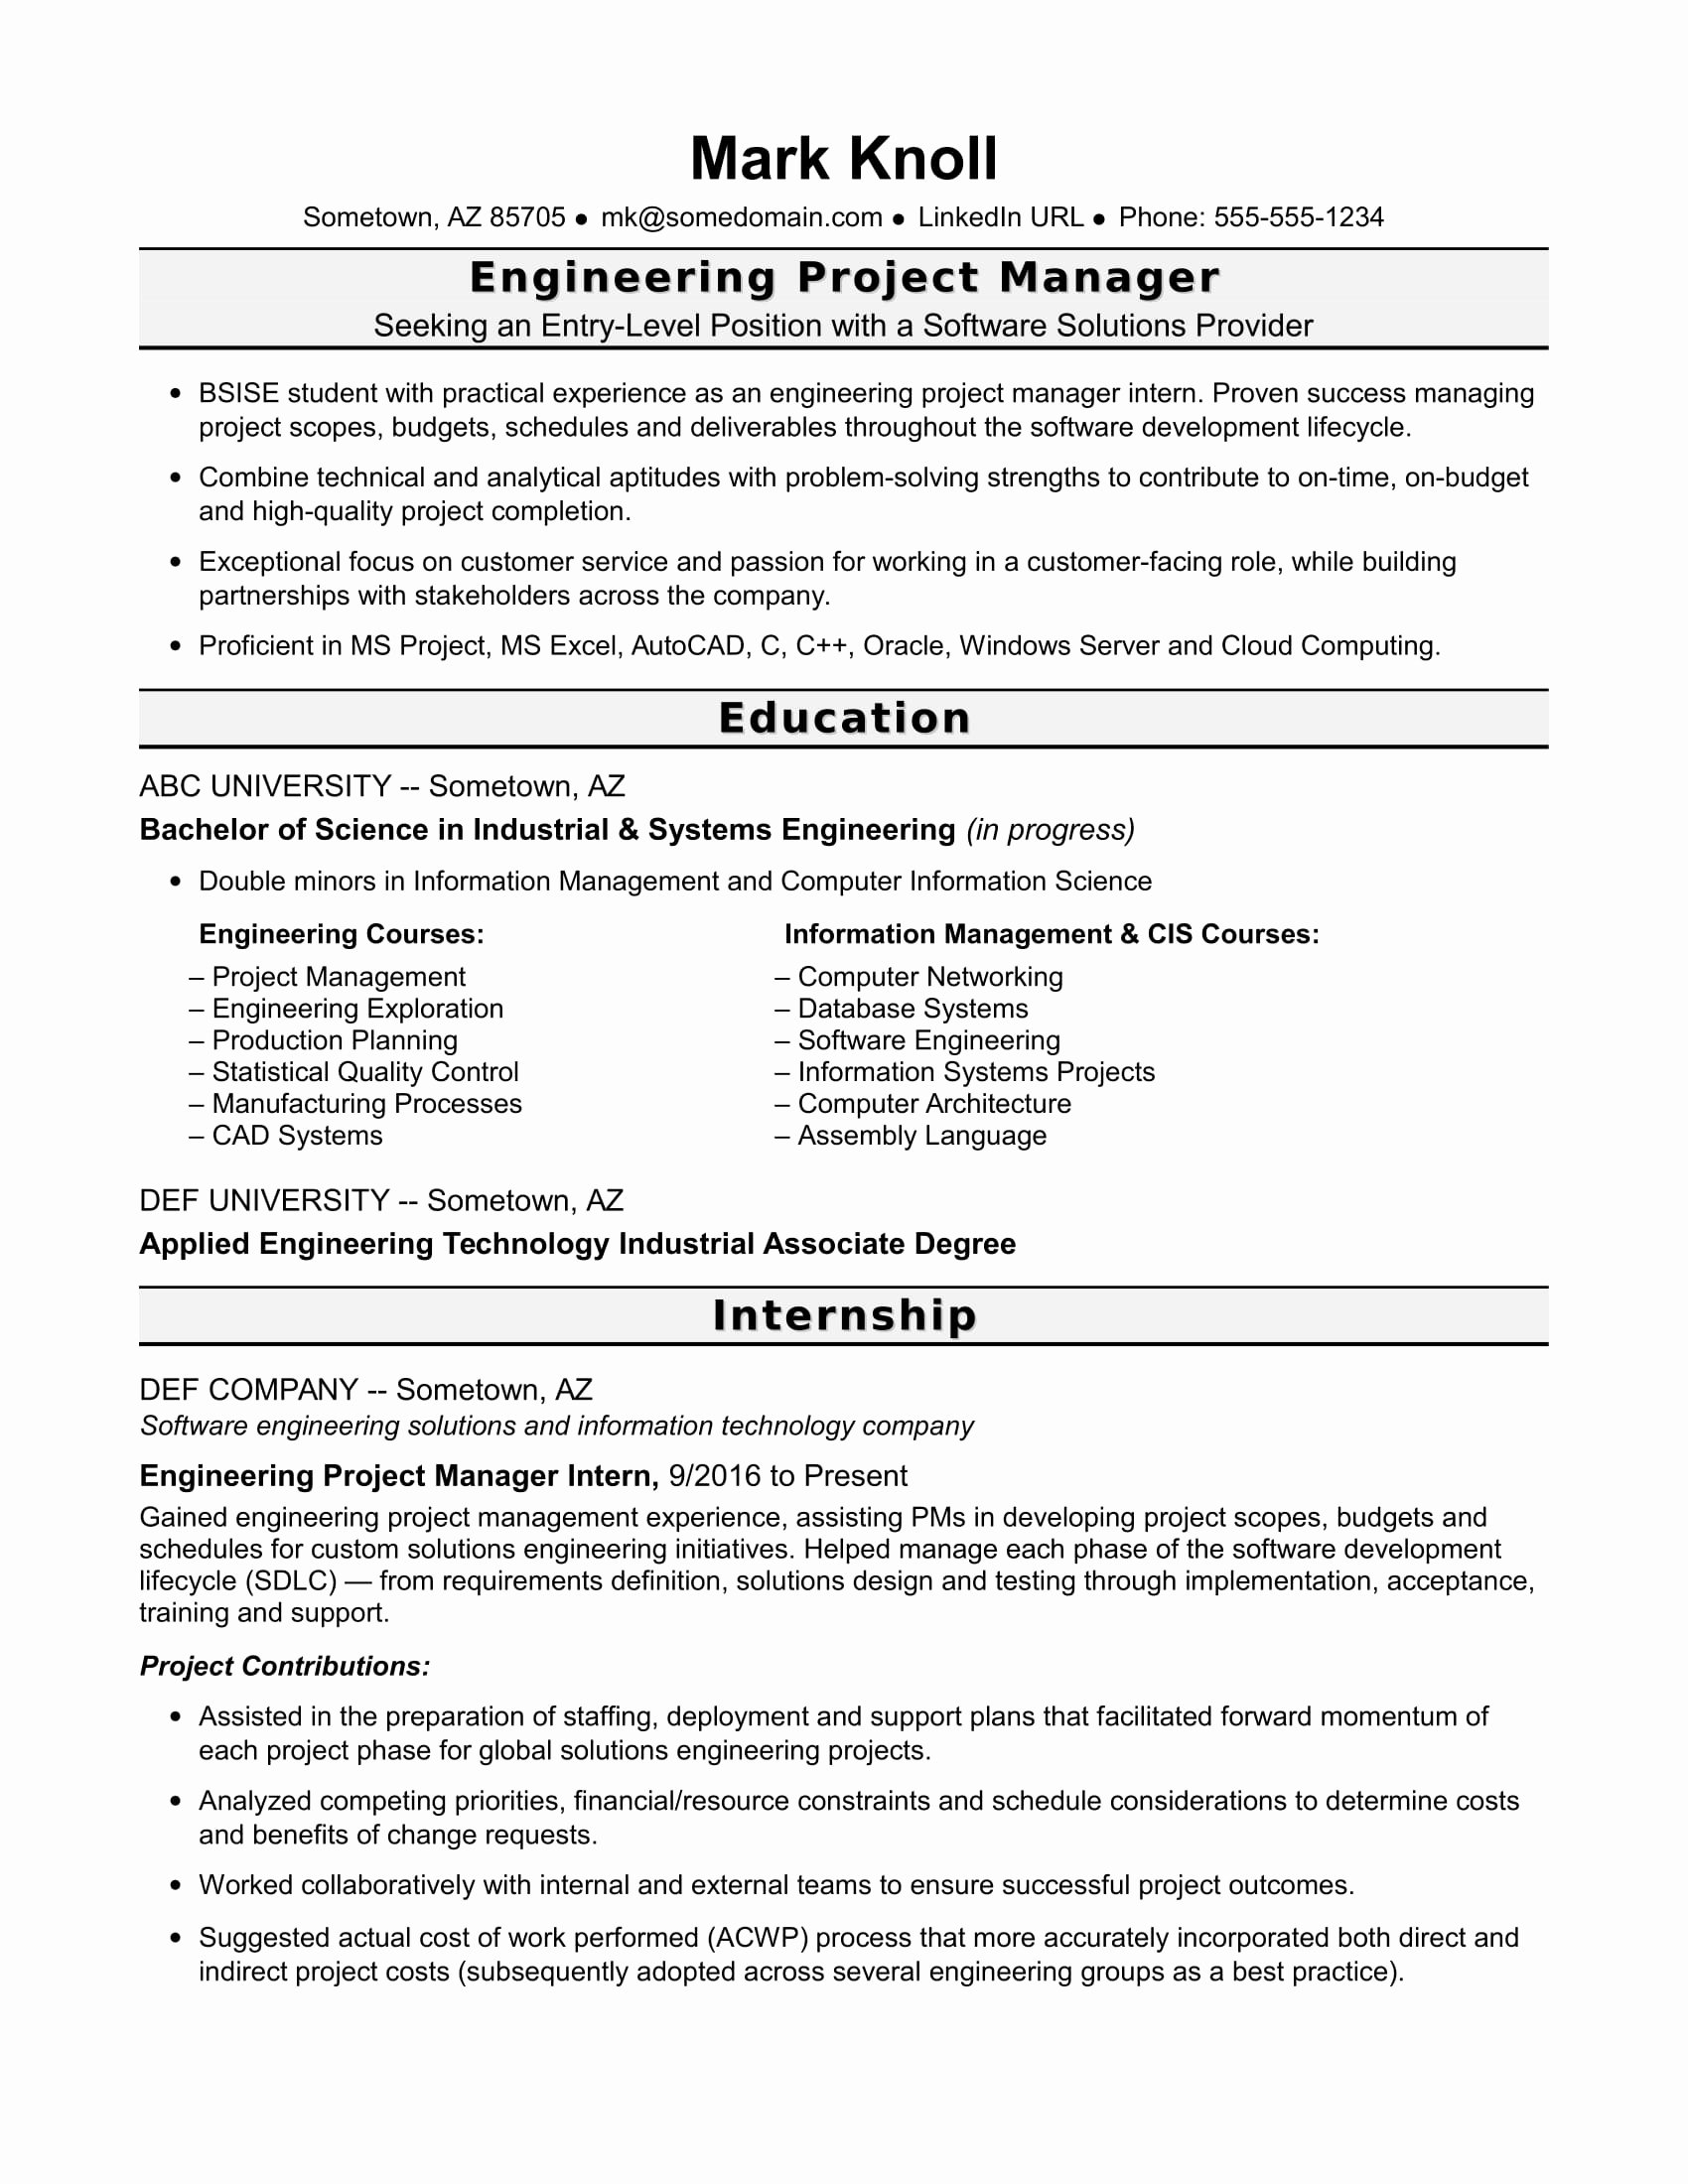 Project Manager Resume Template Inspirational Sample Resume for An Entry Level Engineering Project